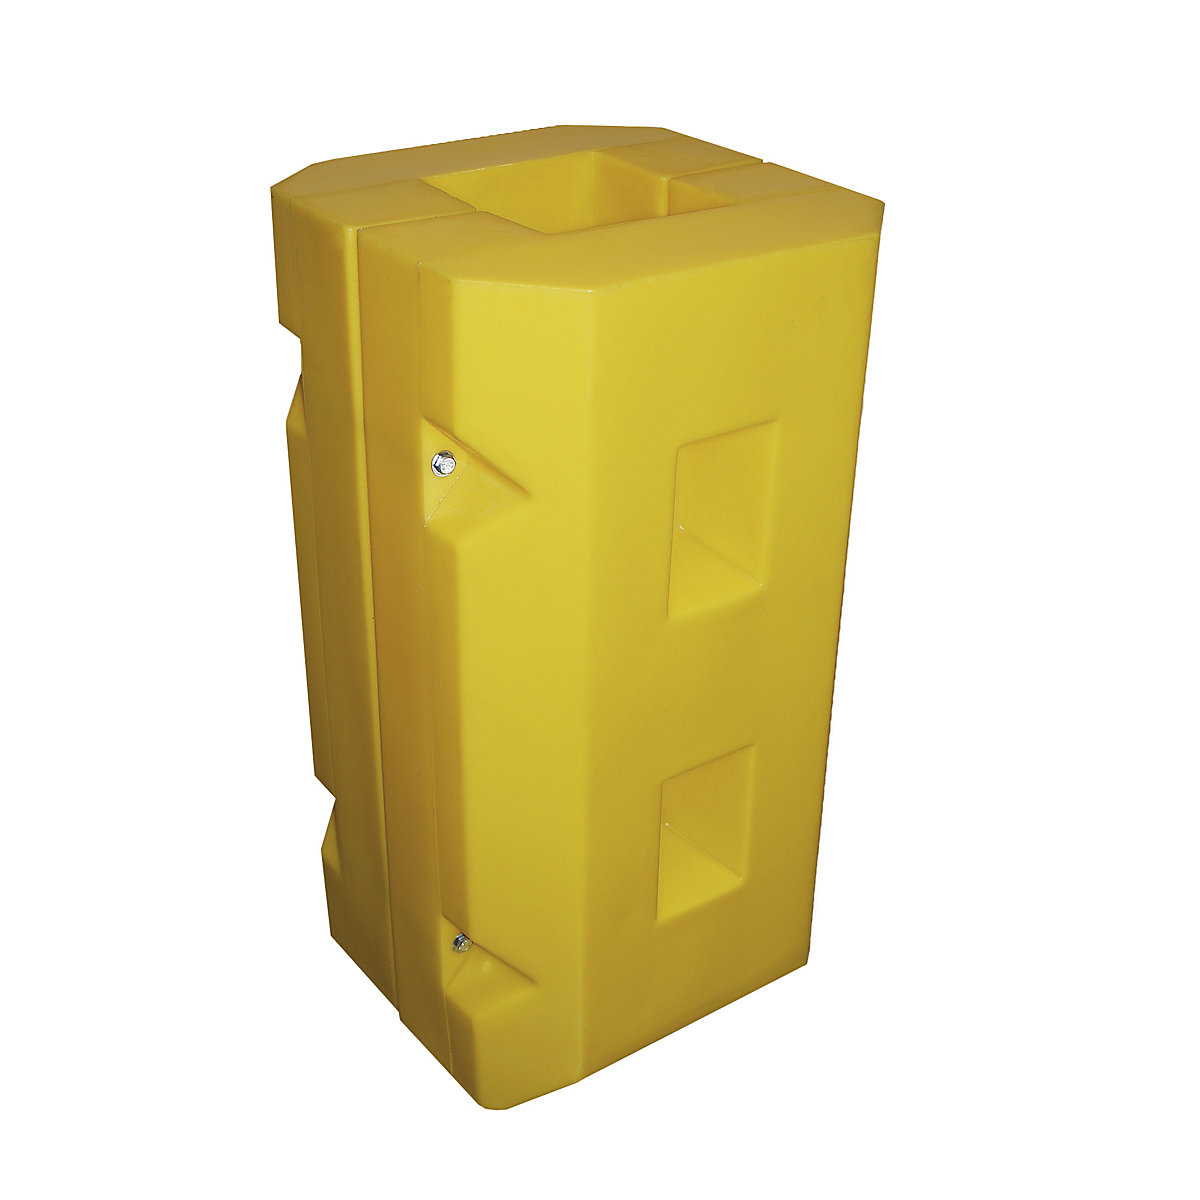 Column and post guard, made of polyethylene, yellow, LxWxH 515 x 450 x 945 mm, internal dimension 215 x 235 mm-5